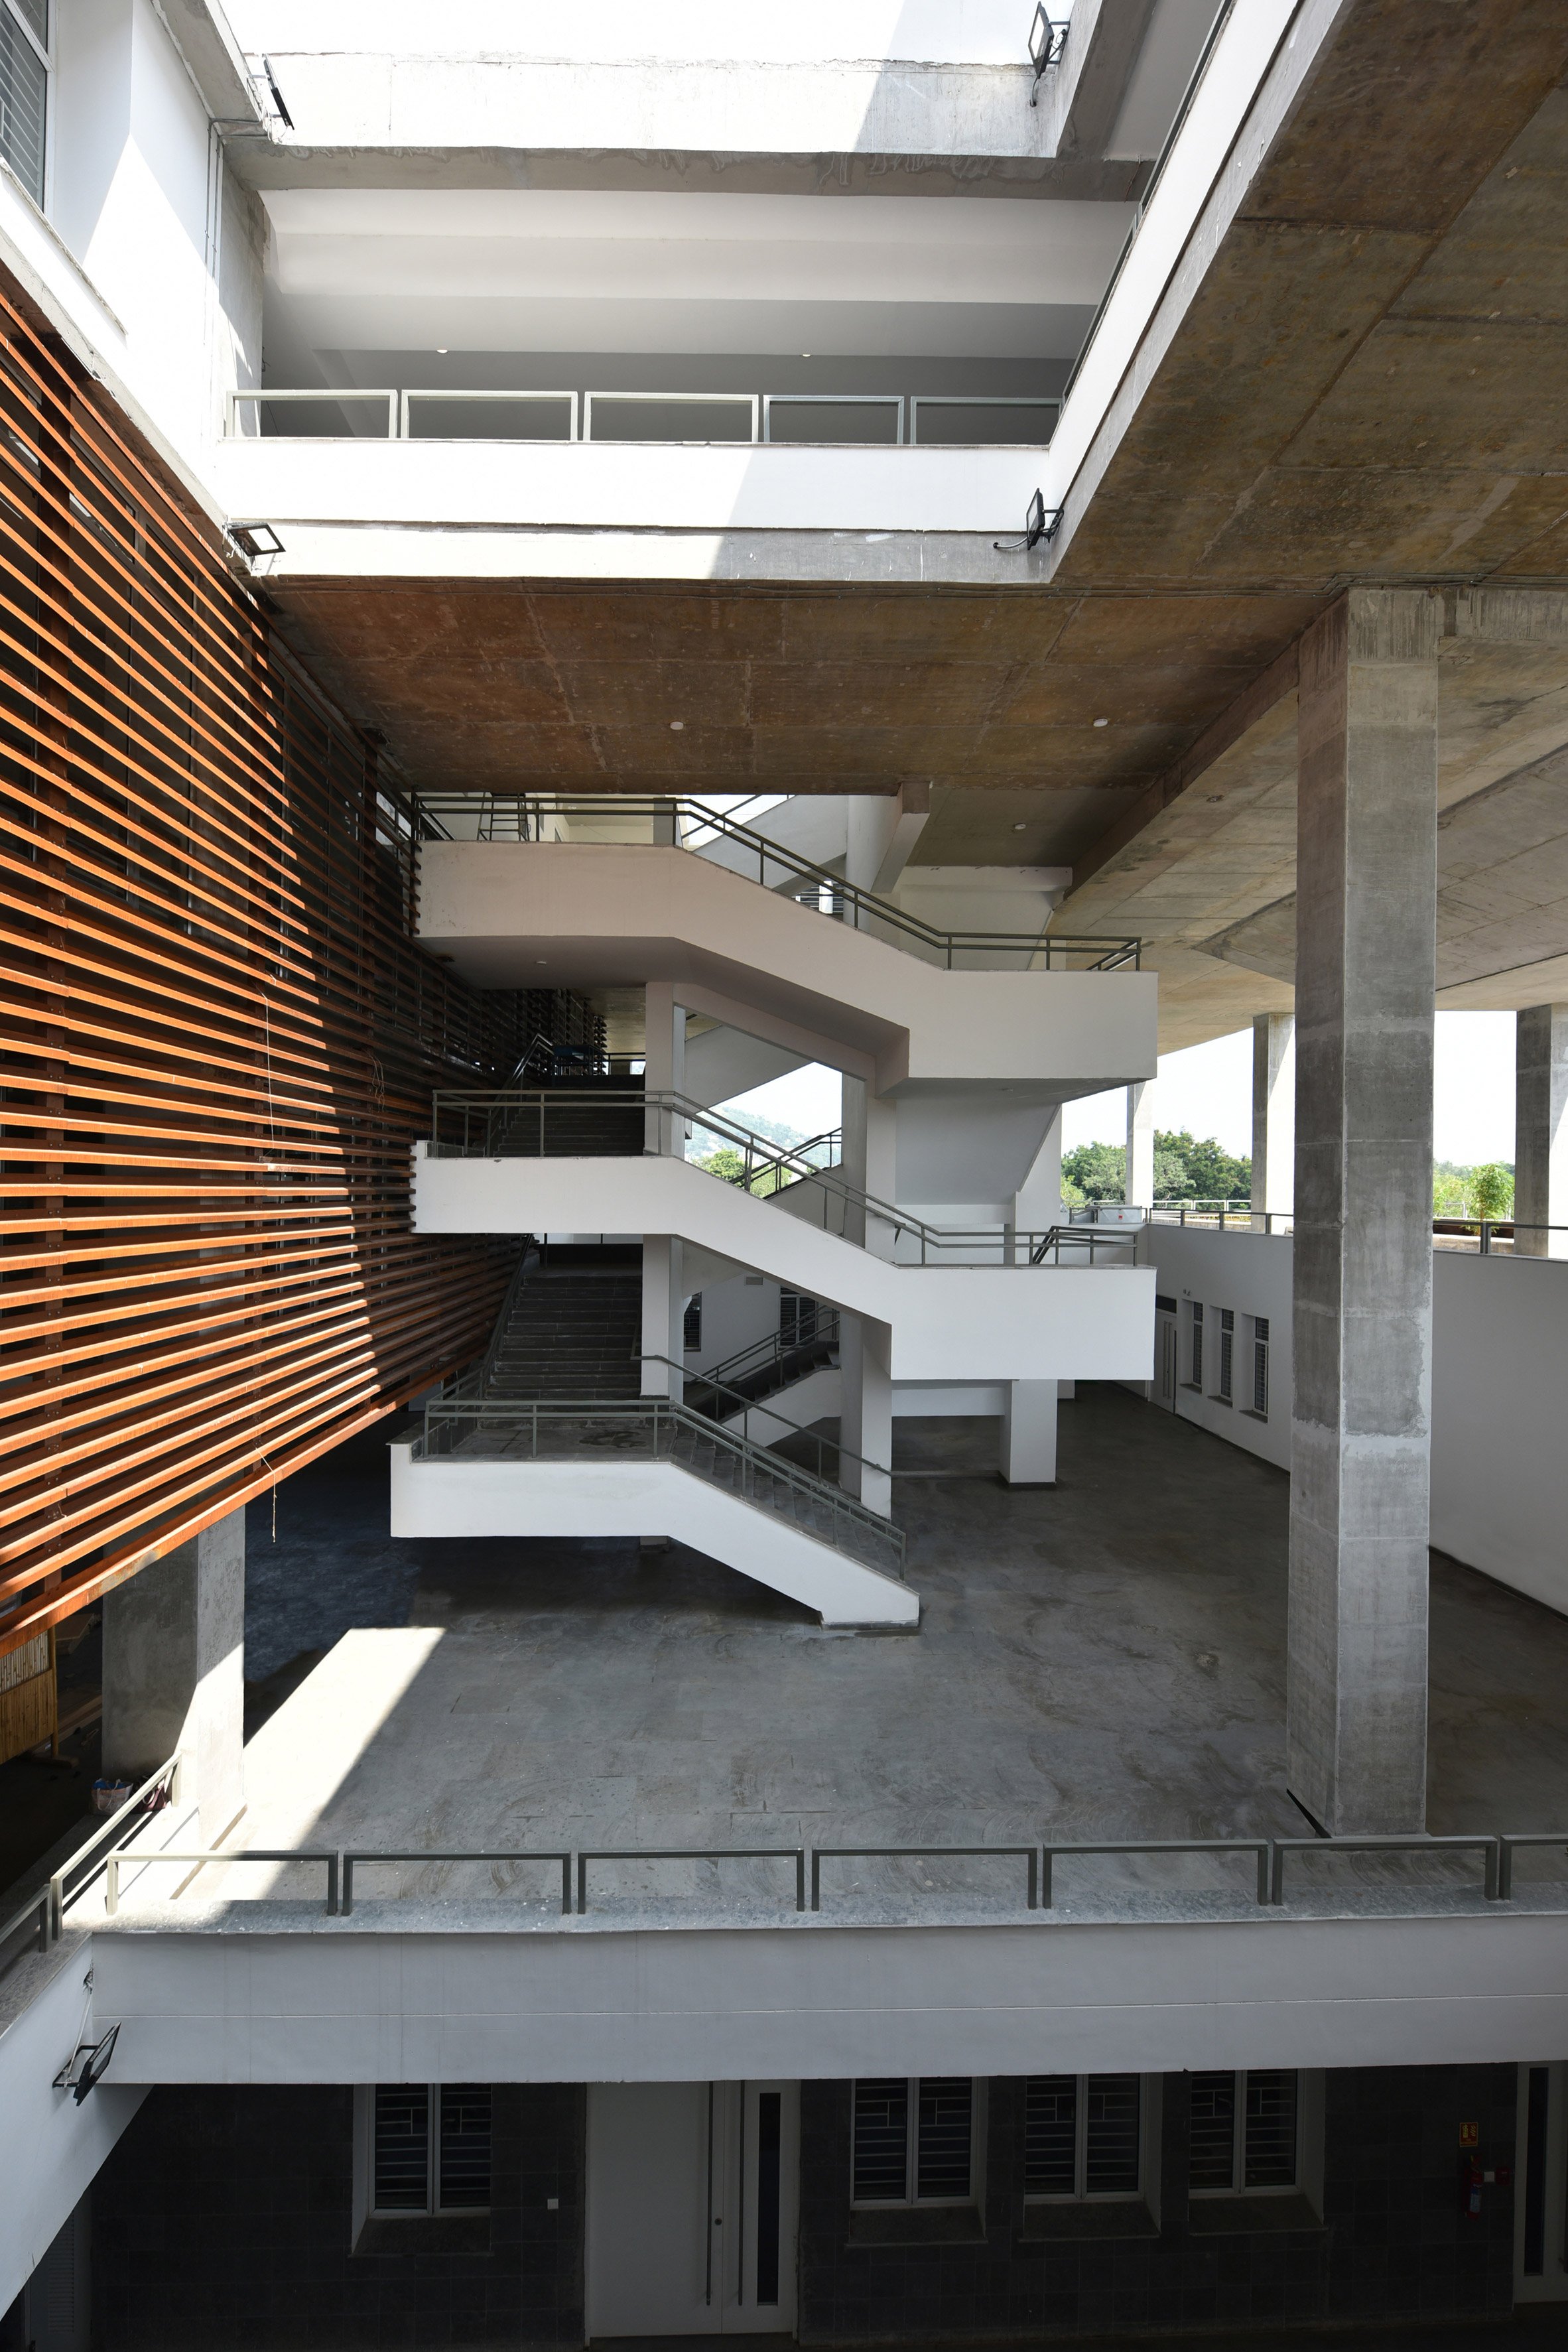 School of Planning and Architecture in Vijayawada, designed by Mobile Offices